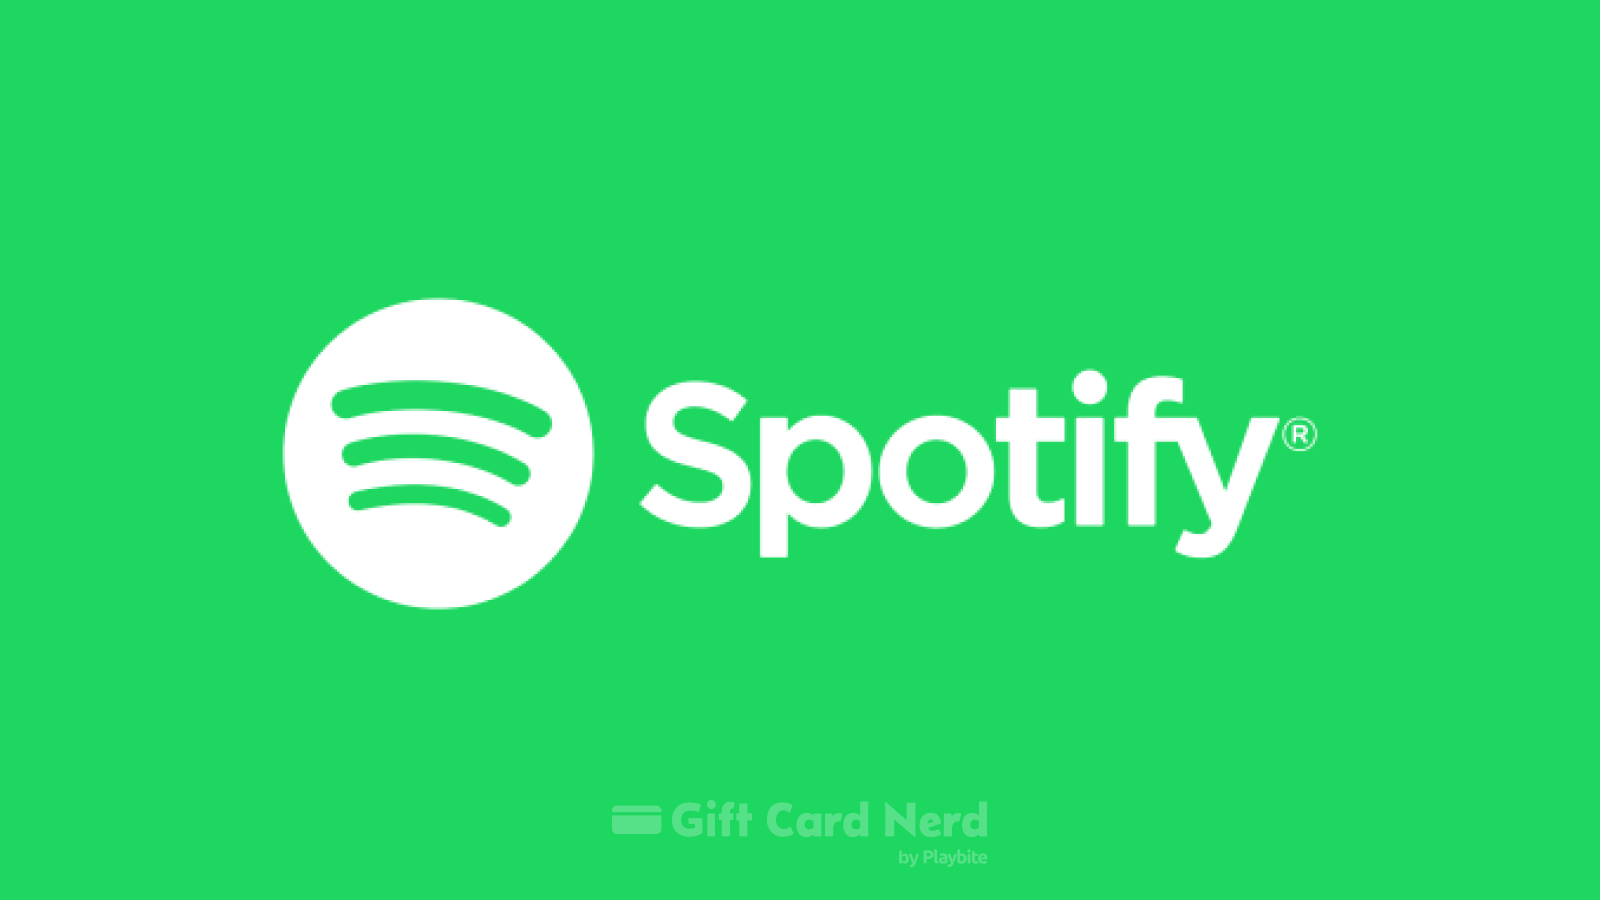 Can You Use a Spotify Gift Card on PayPal?